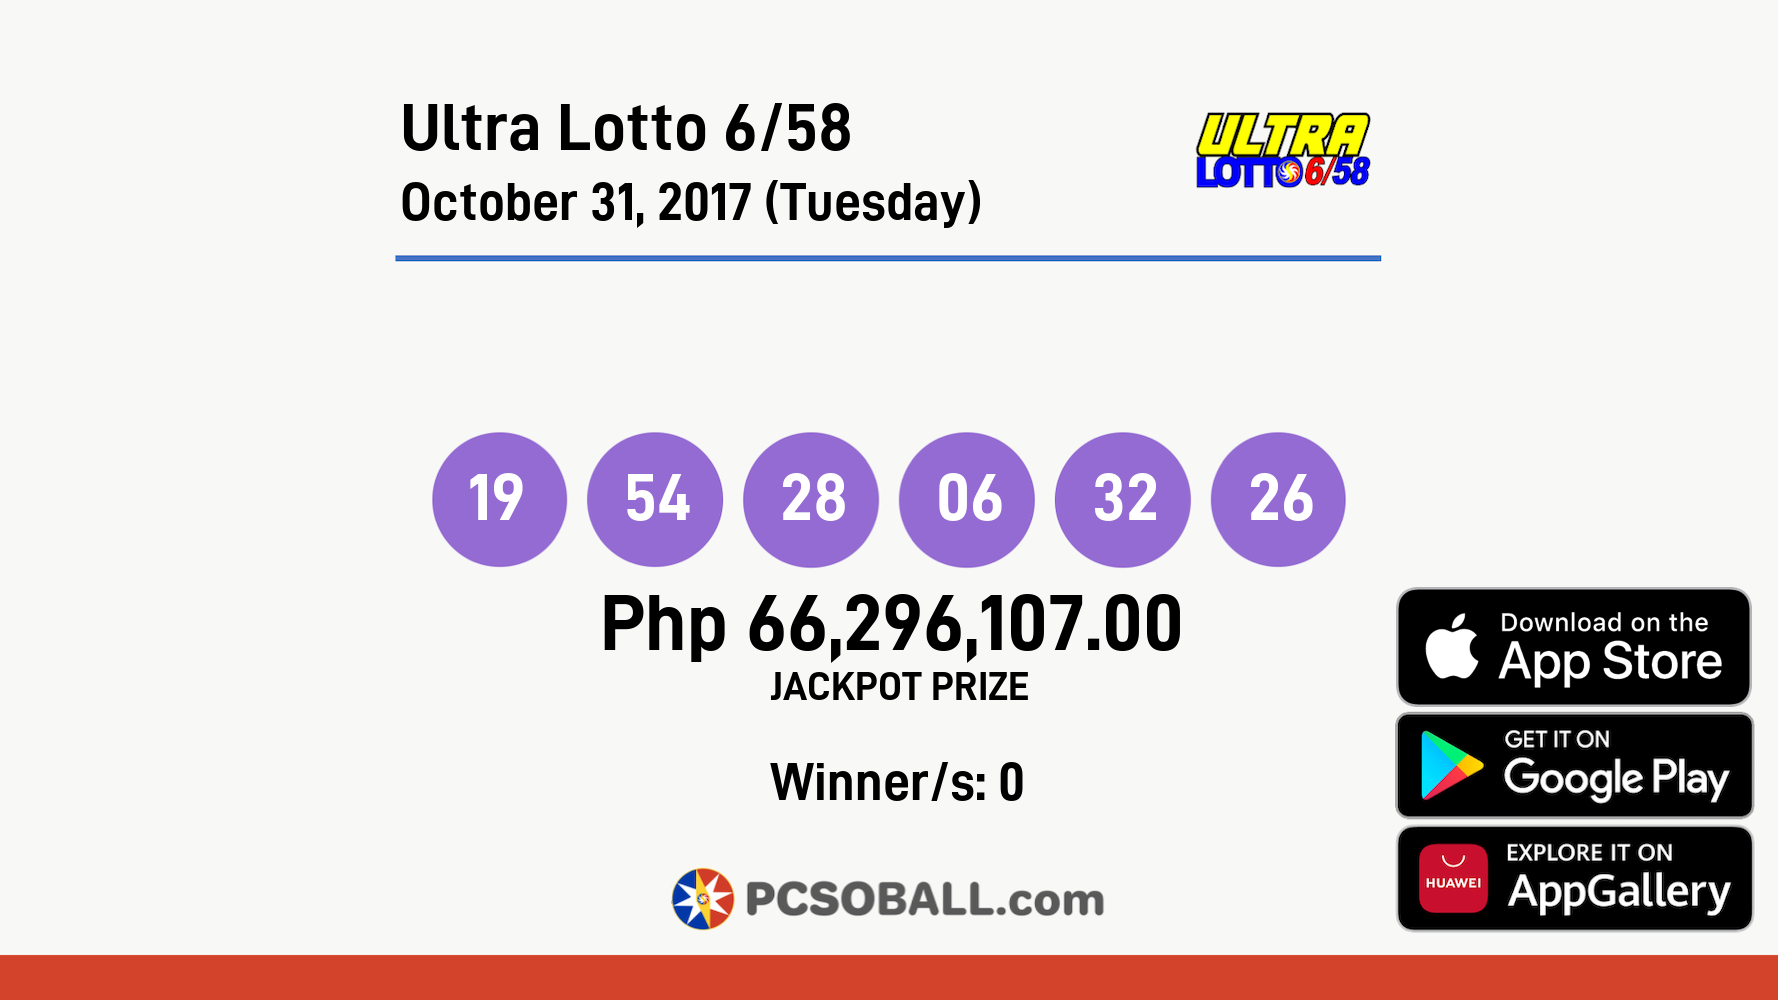 Ultra Lotto 6/58 October 31, 2017 (Tuesday) Result